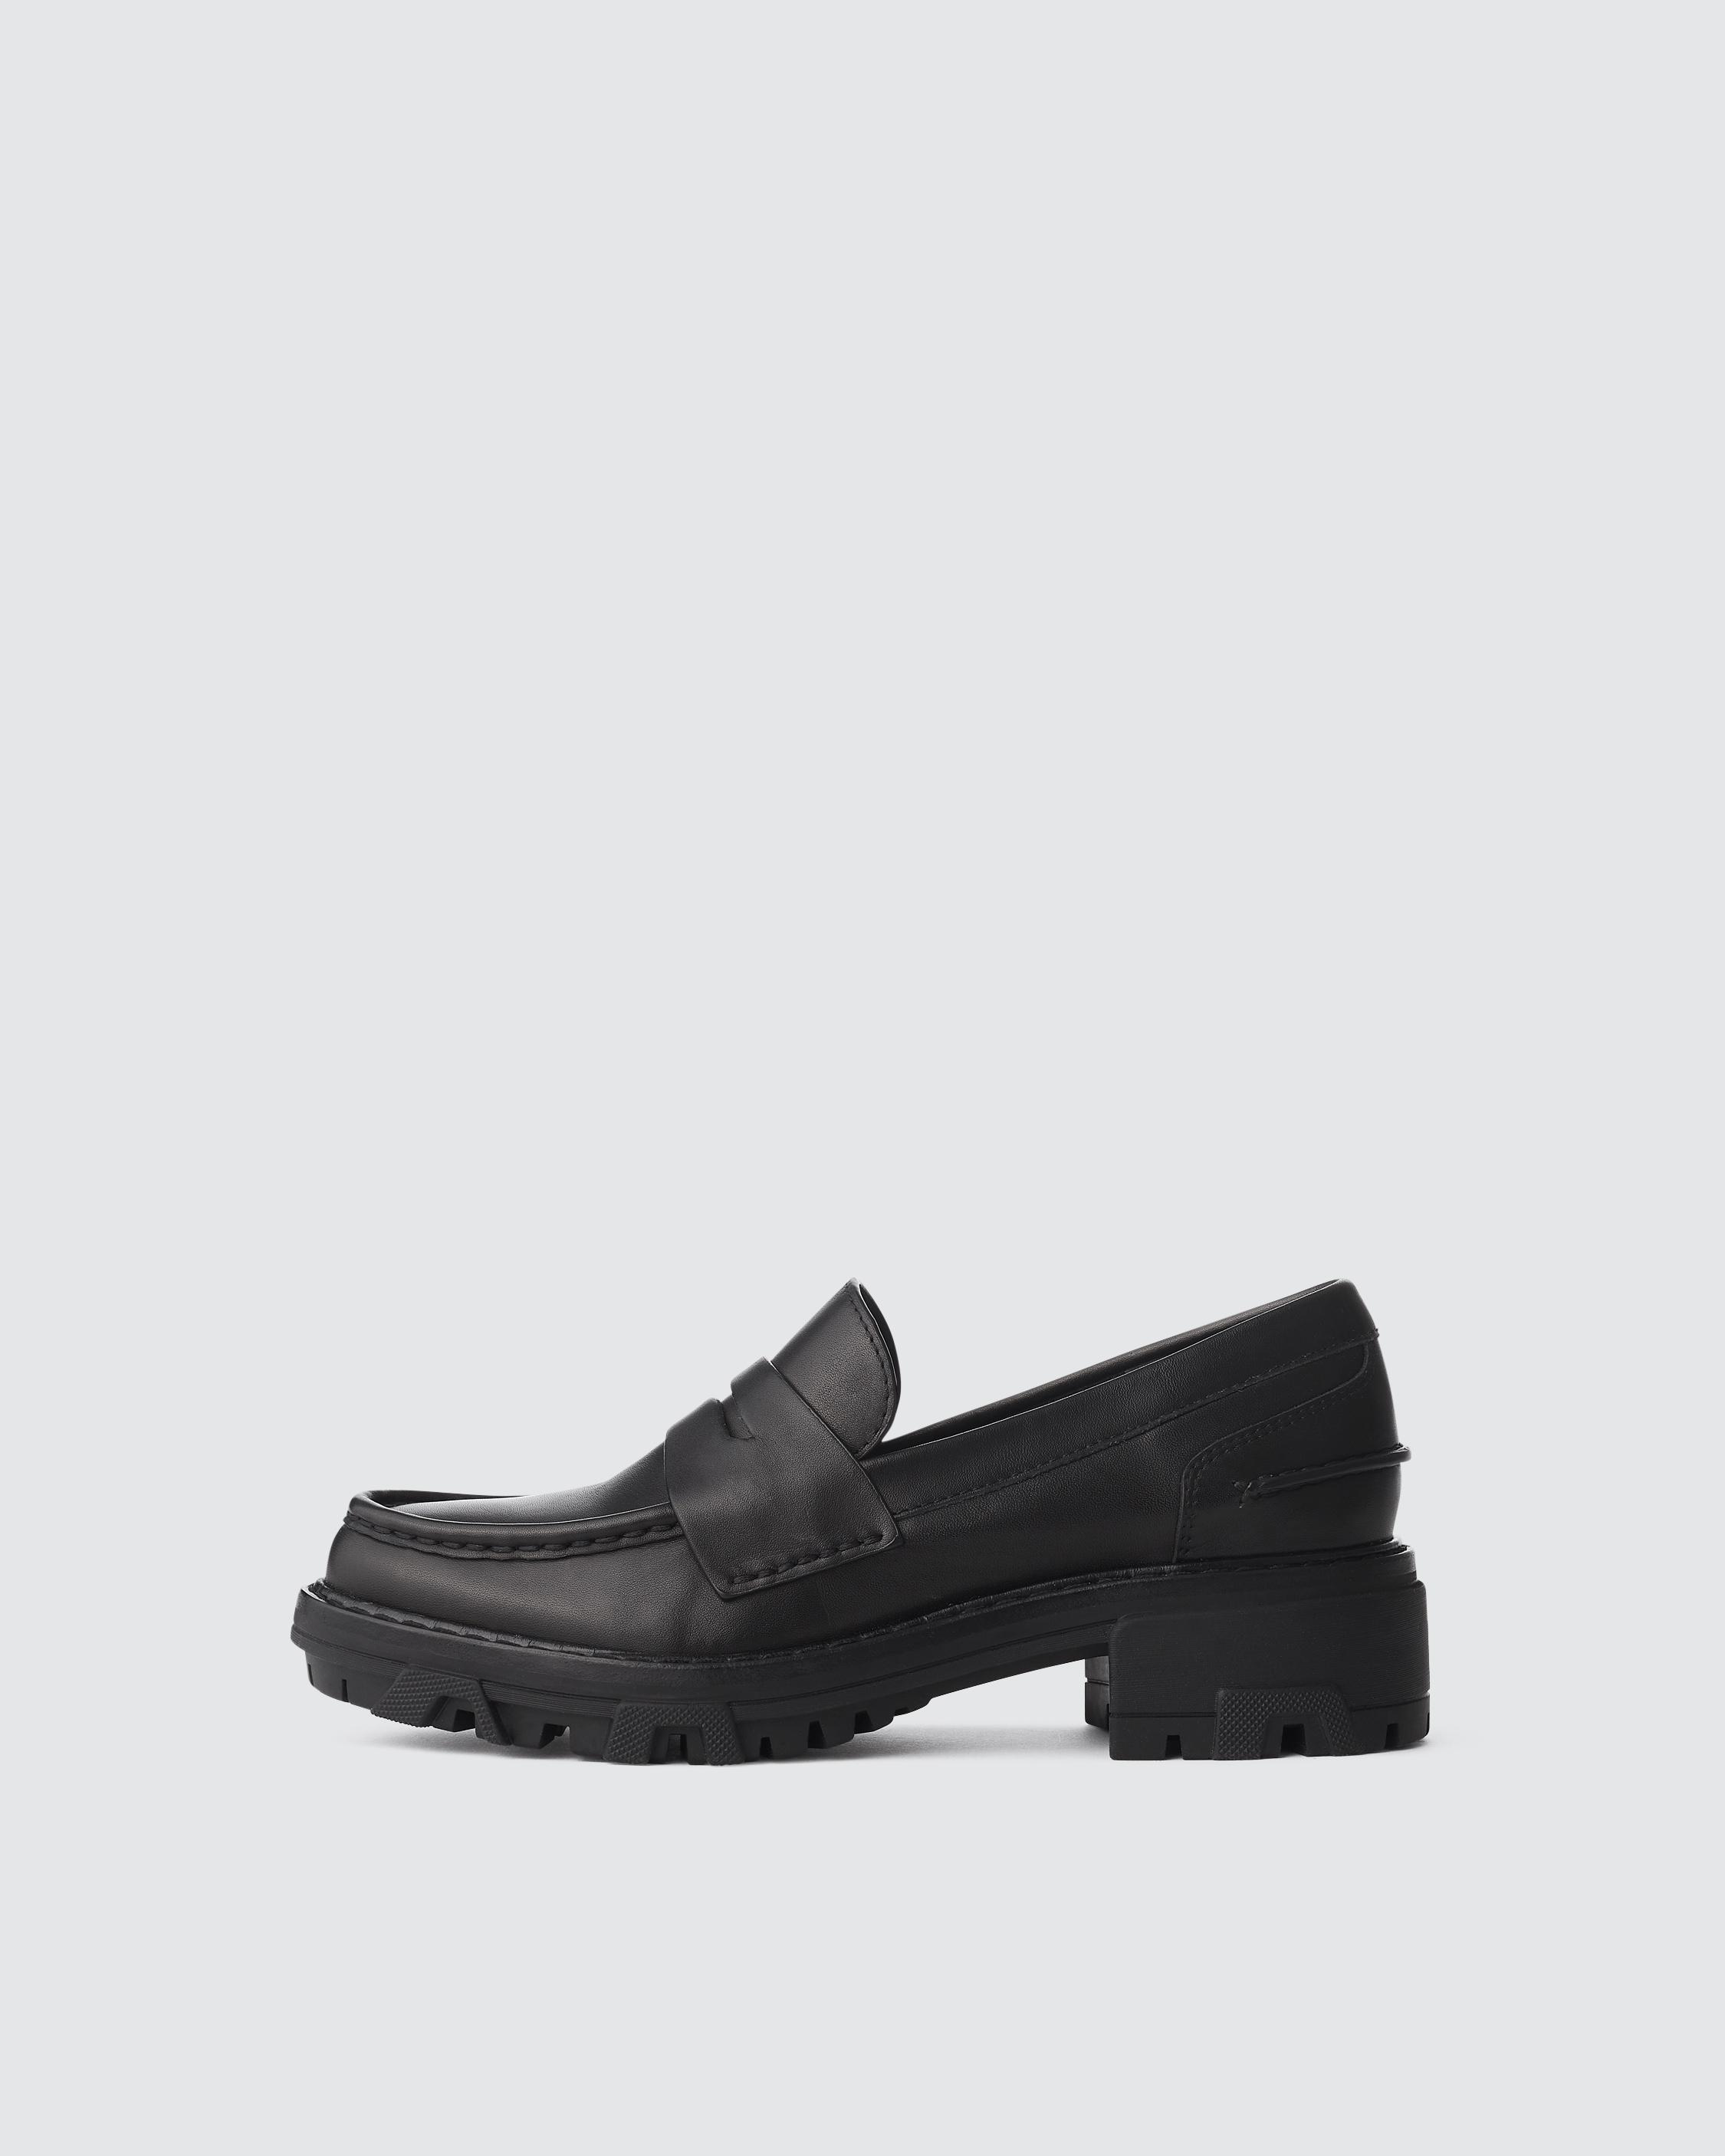 https://cdn.media.amplience.net/i/rb/WFF23FF029SR29-001-A/Shiloh-Loafer---Leather-001?$small$&fmt=auto